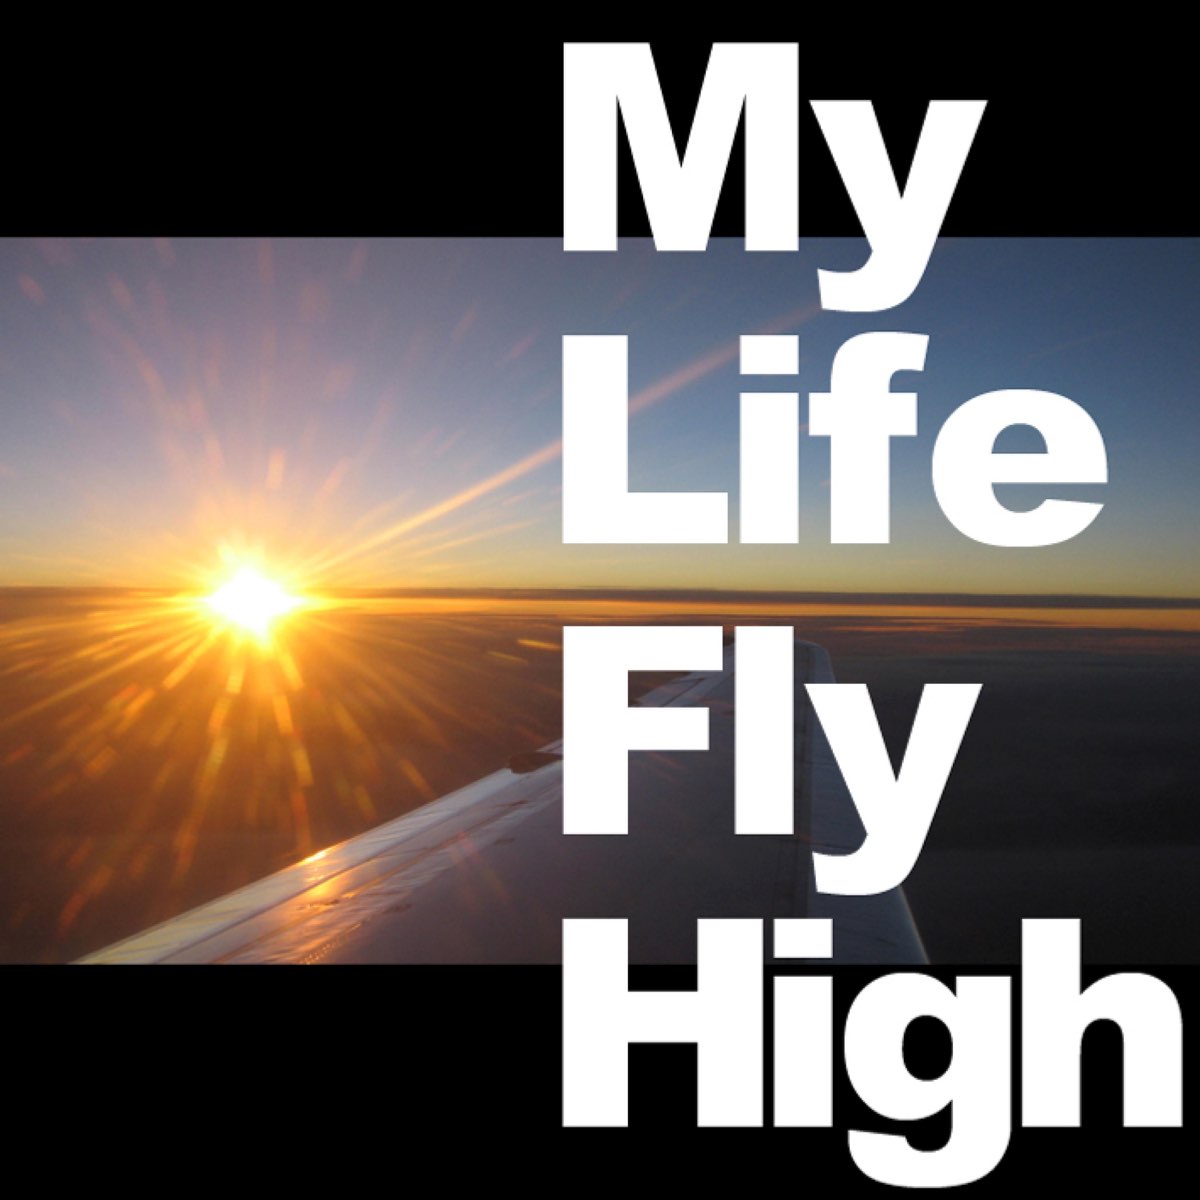 Fly Life. Fly High песни. Fly High Возраст. Фраза Life to Fly. Хай янг